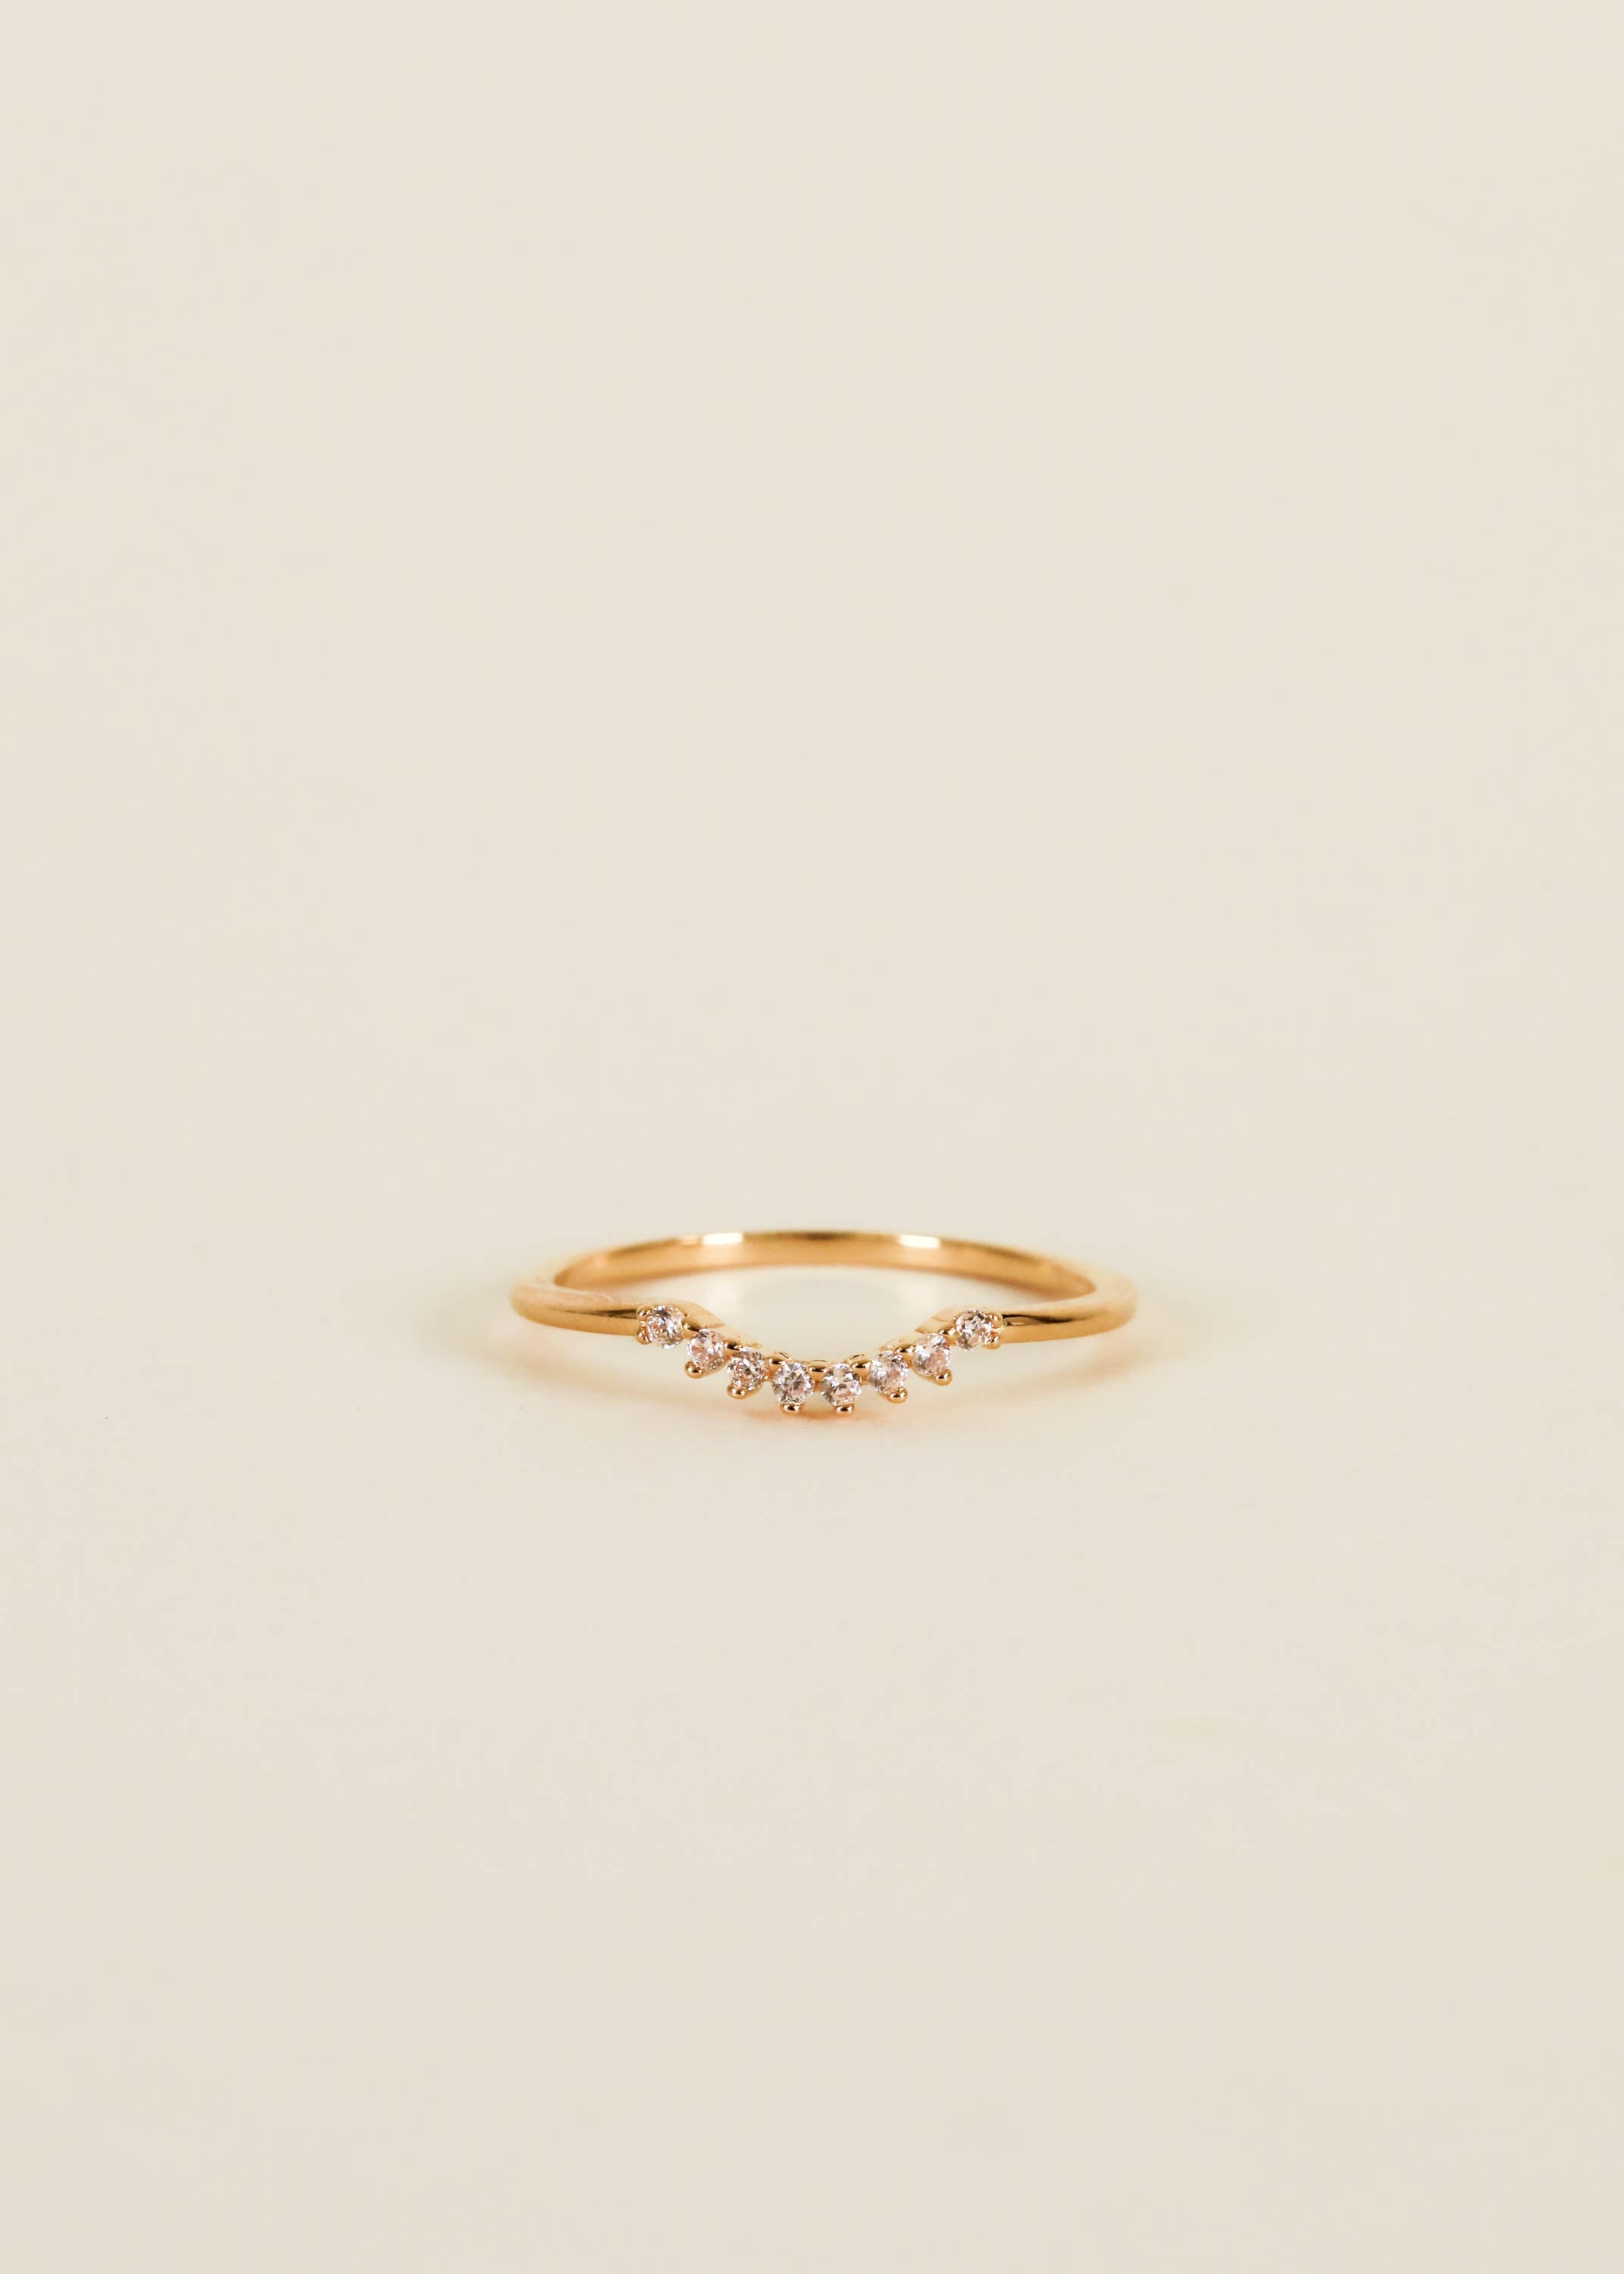 JaxKelly - Ring - Arched Crown - Champagne